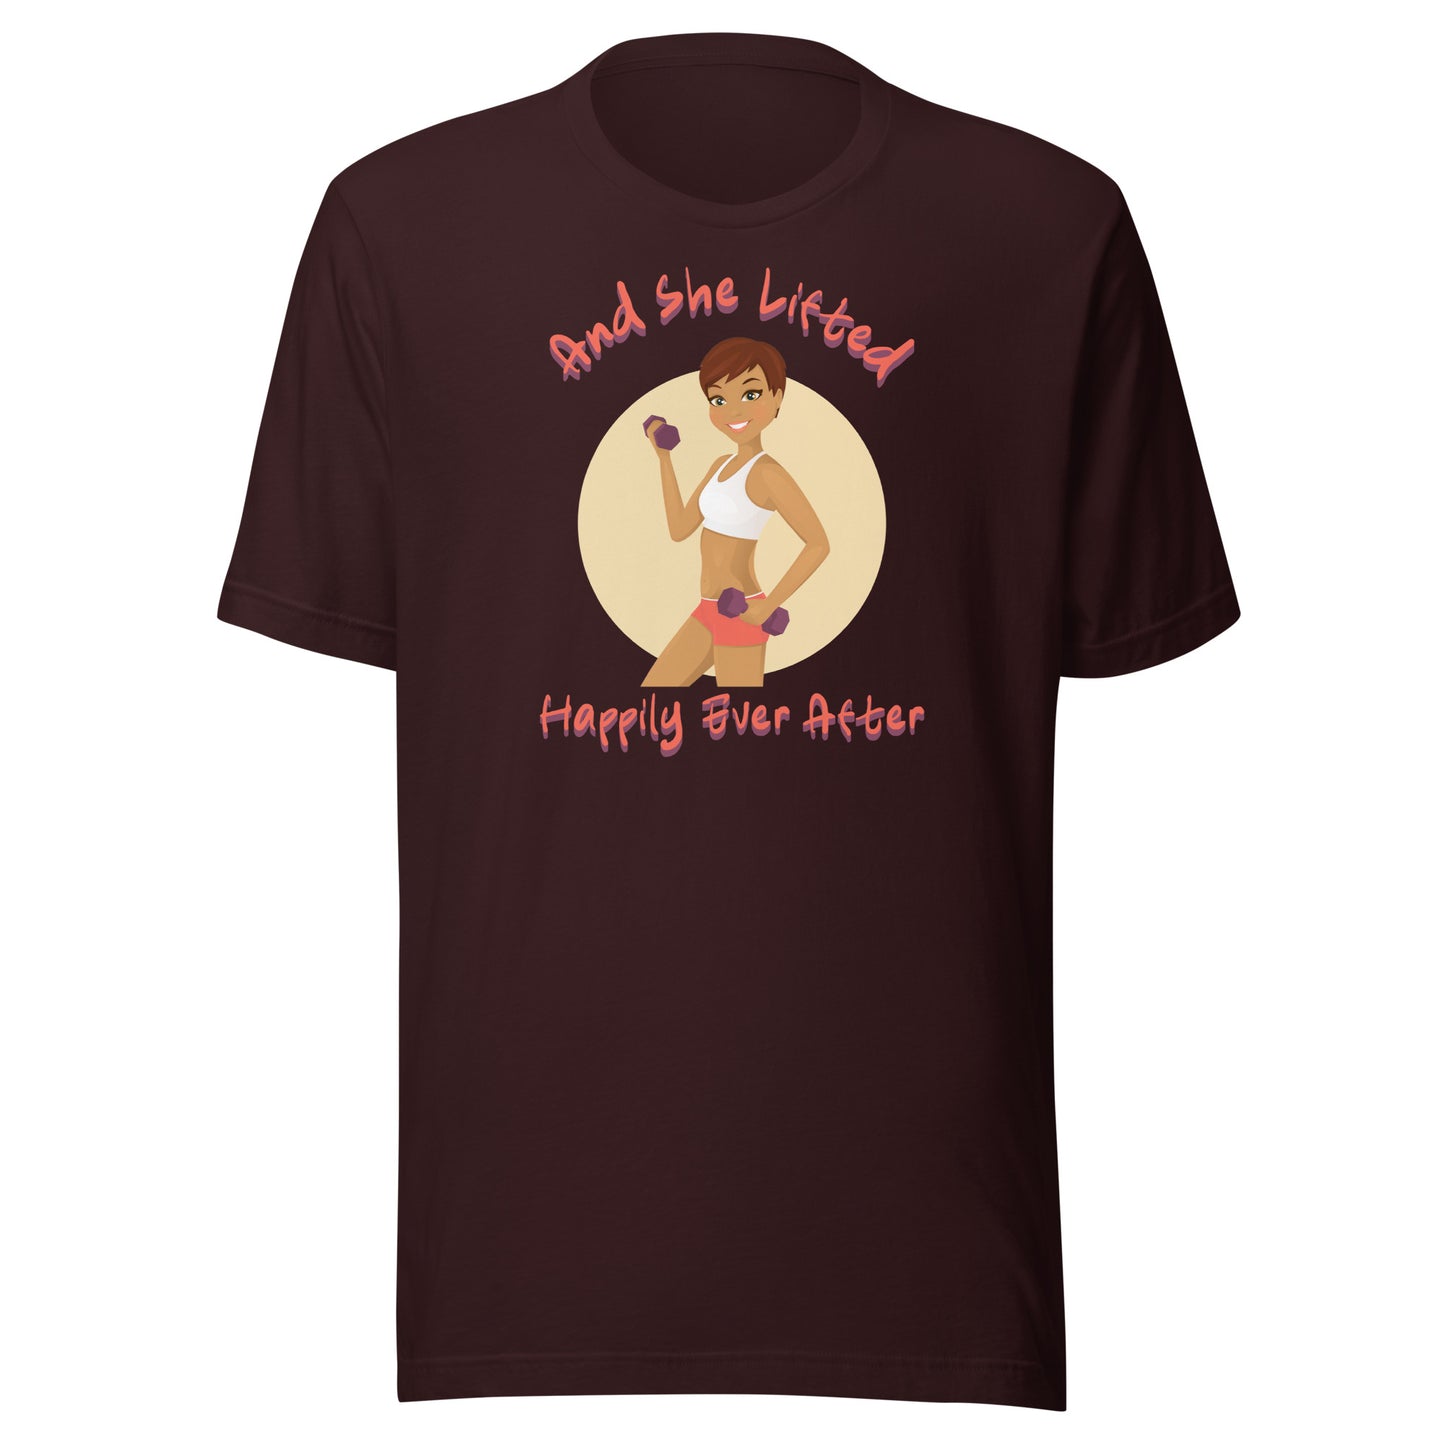 And She Lifted Happily Ever After Unisex t-shirt